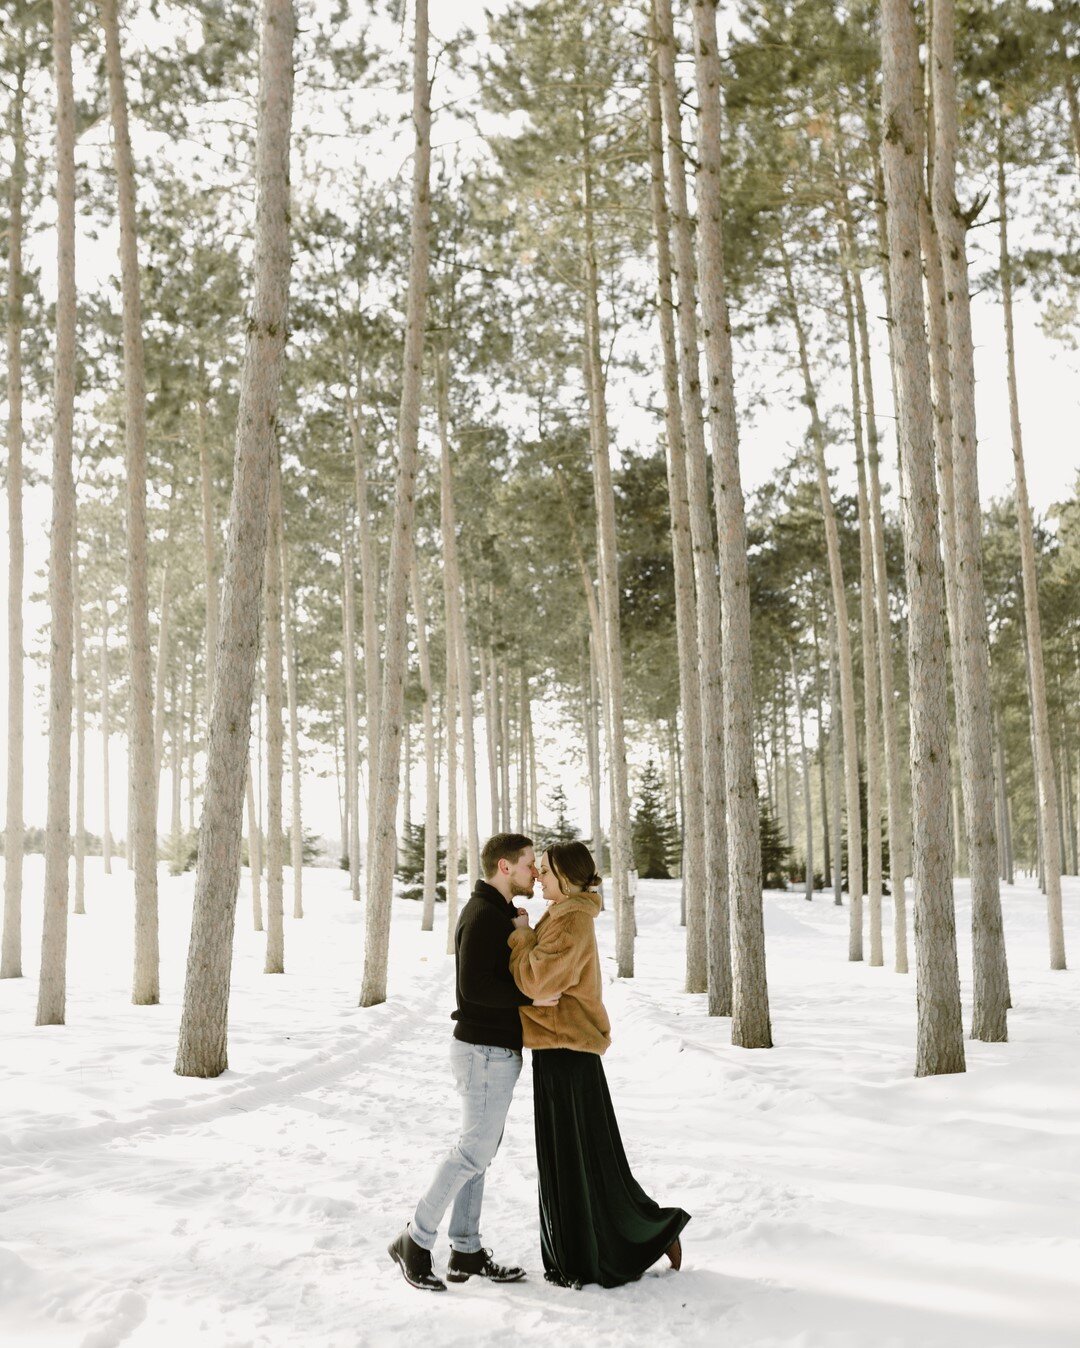 We're North Shore bound this weekend and are so ready to be surrounded by some tall pines just like Cassidy &amp; Joey were at their engagement session last month. Honestly, spending a weekend away anywhere other than our house is going to be such a 